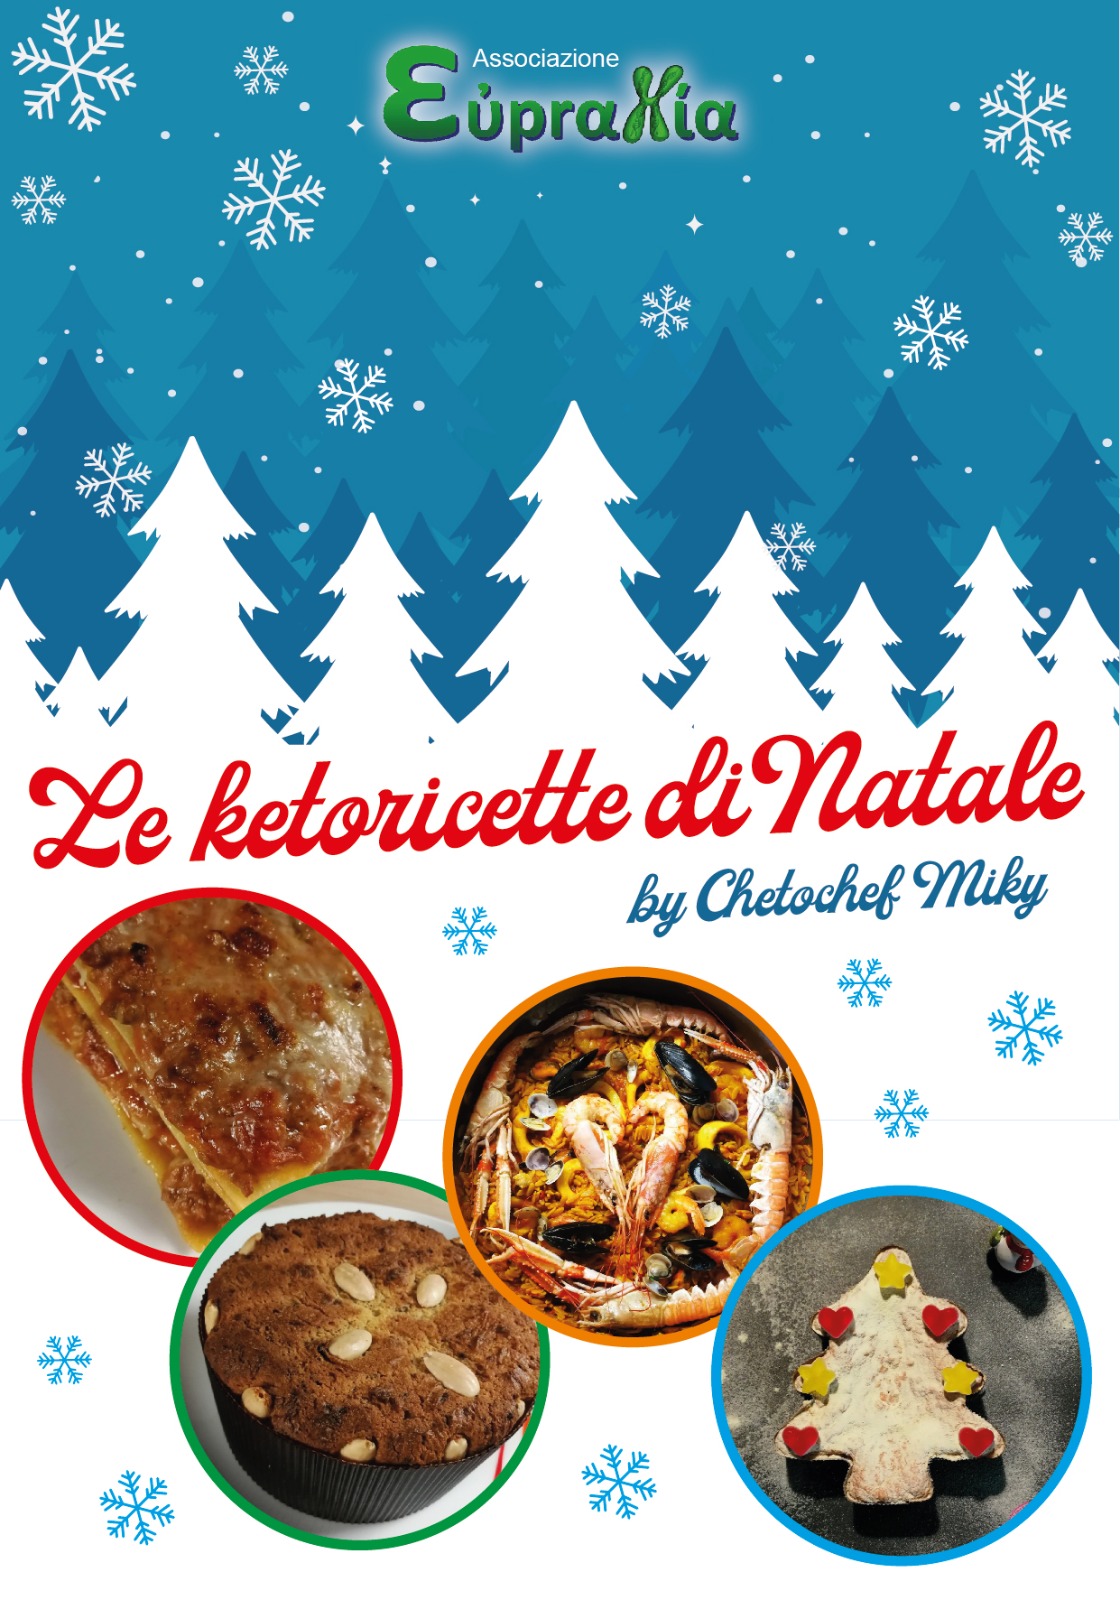 Featured image for “Le ketoricette di Natale by Chetochef Miky”